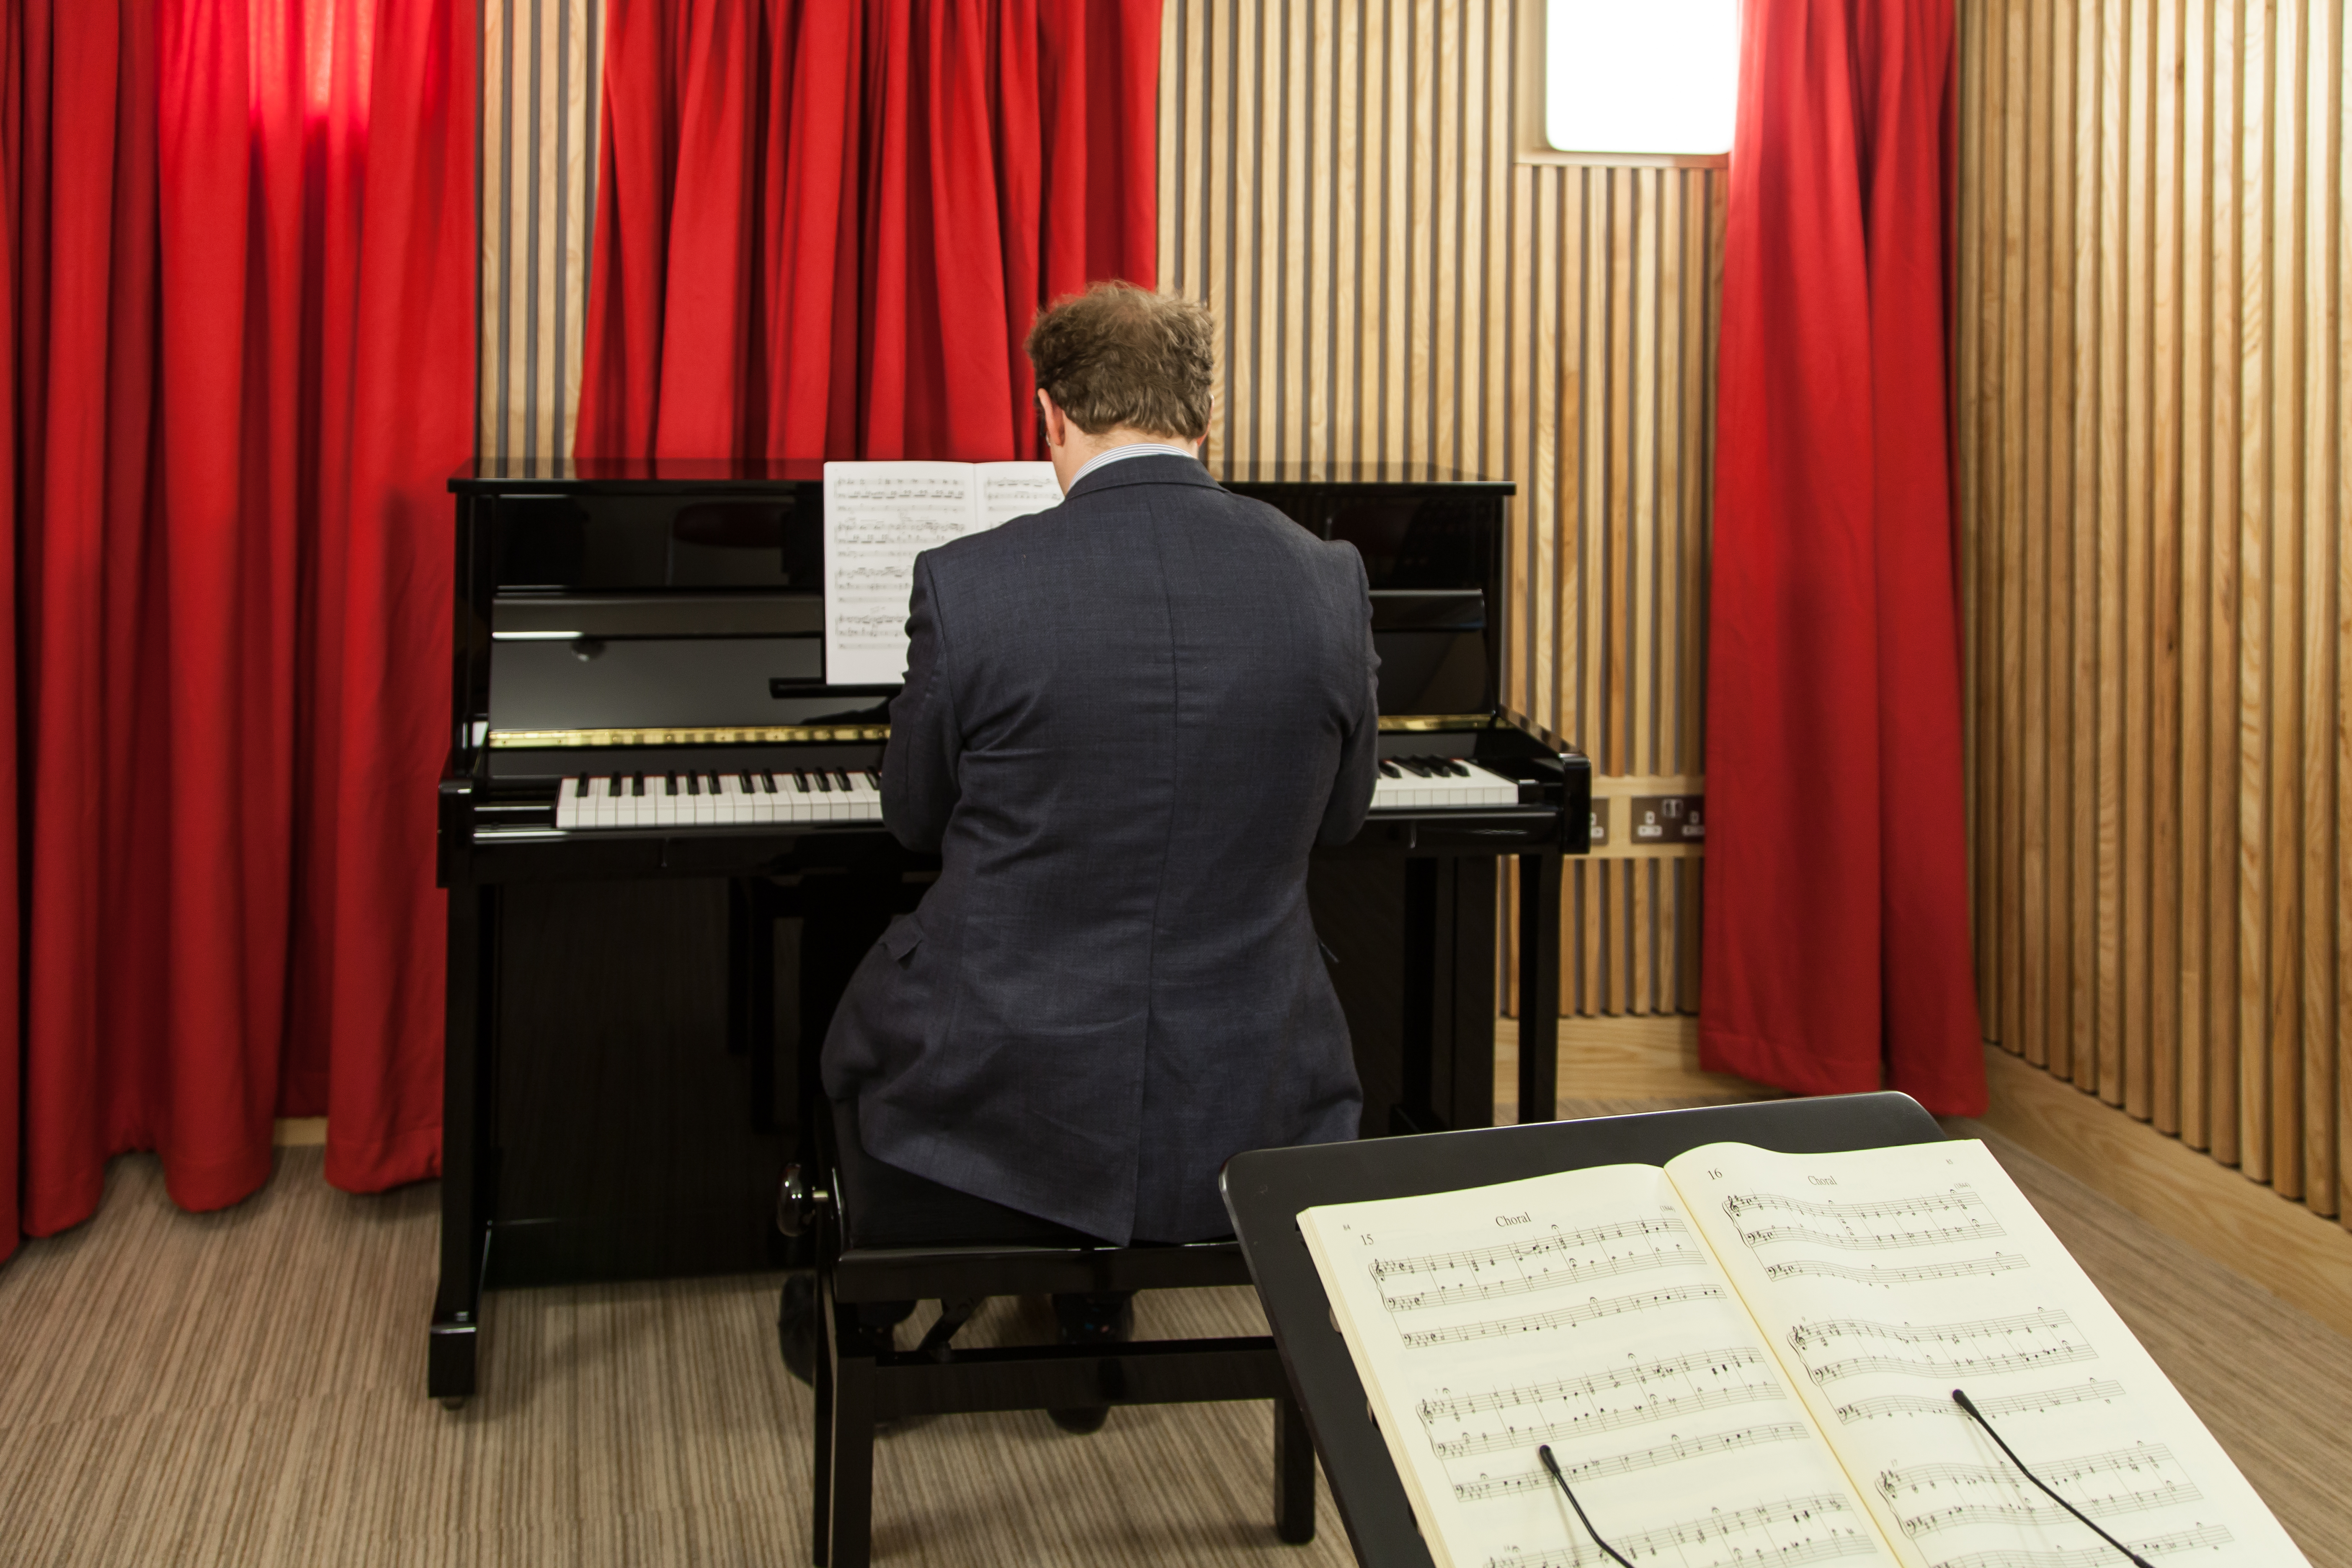 Music practice room, with Benjamin Nicholas, Reed Rubin Organist & Director of Music, Stipendiary Lecturer in Music, at the Yamaha piano